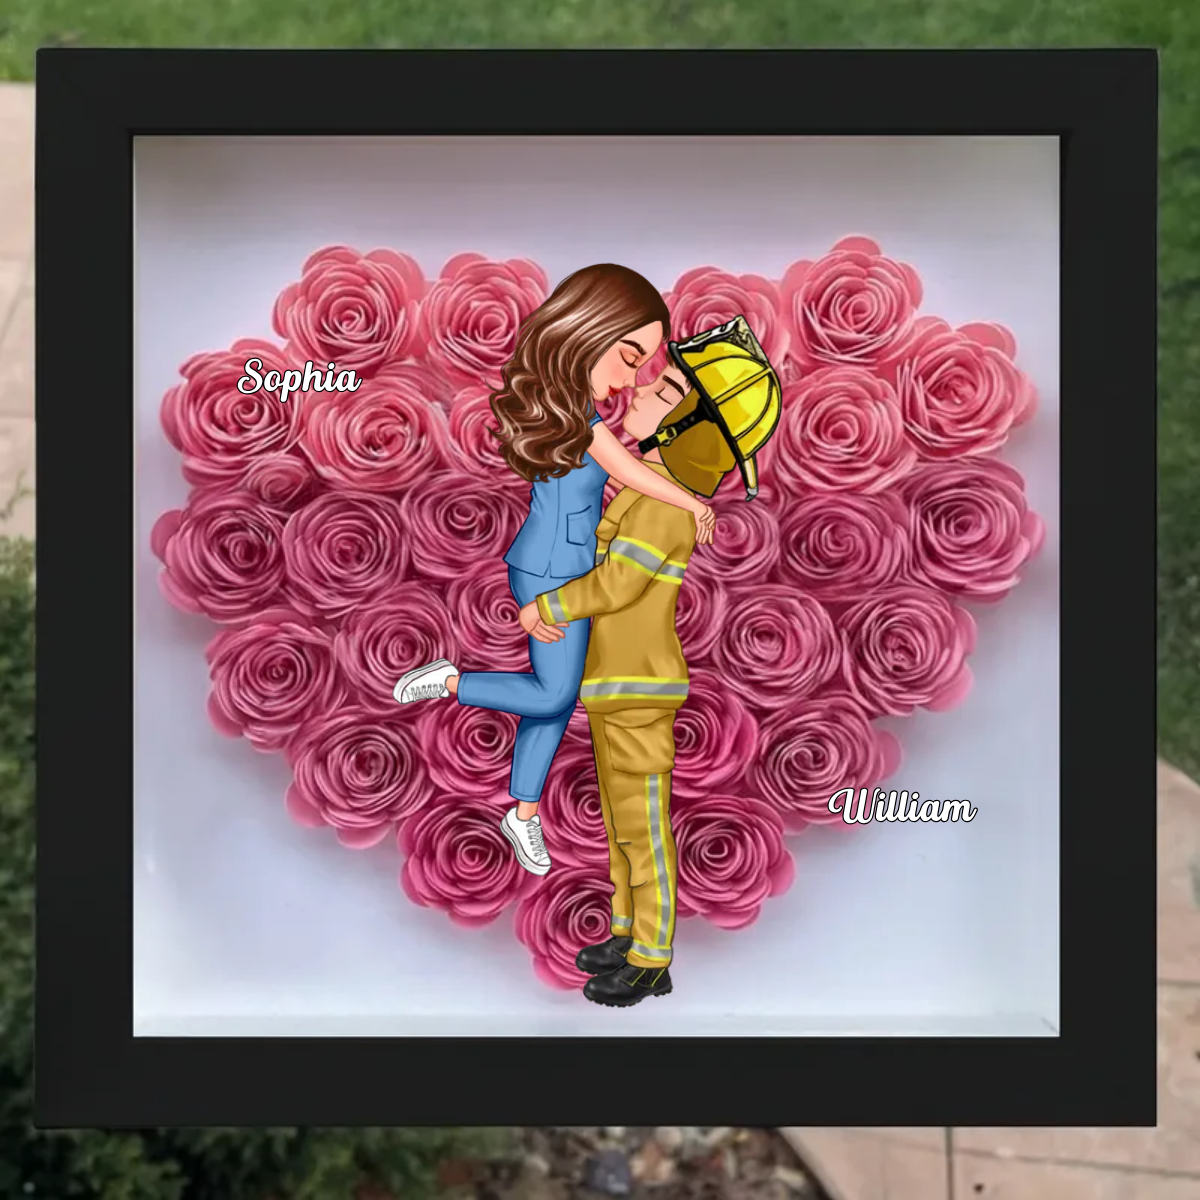 Gift For Couples by Occupation Gift For Her Gift For Him Firefighter, Nurse, Police Officer Personalized Heart Rose Shadow Box